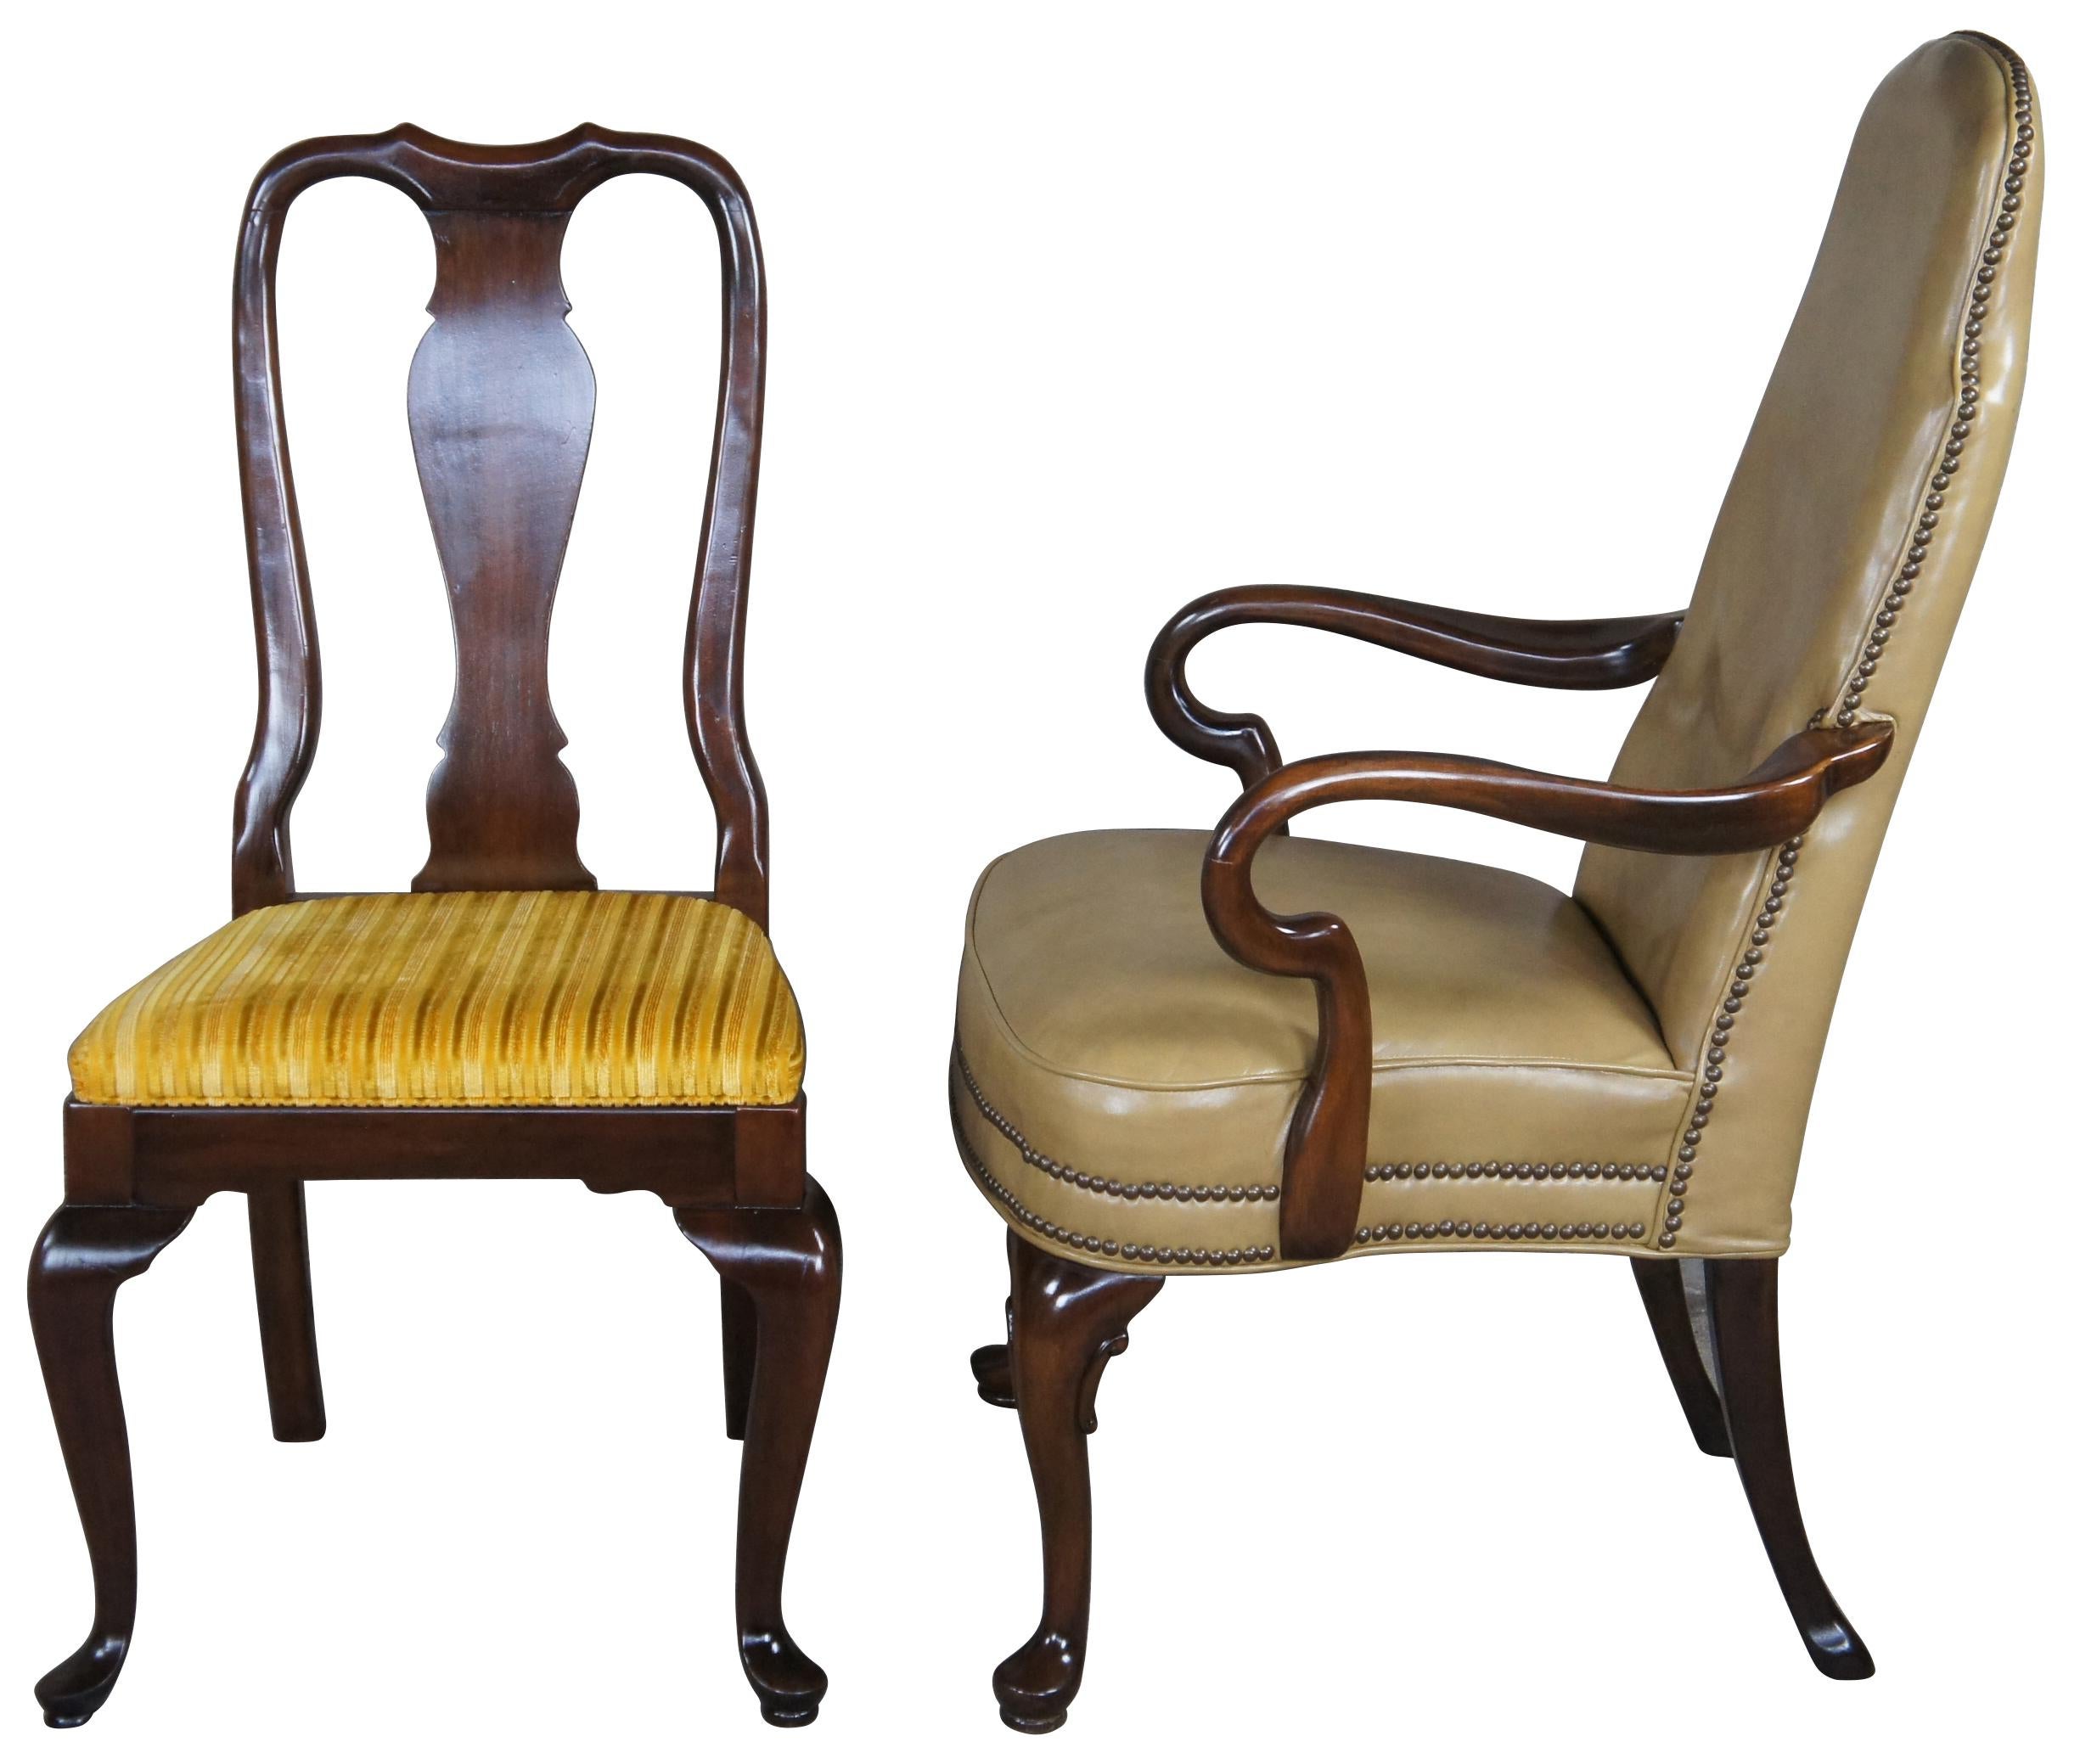 Circa 1980s Ethan Allen Georgian Court dining chairs. Made from solid cherry in Queen Anne styling. Features a shaped crest rail over vase shaped splat leading to seats supported by cabriole legs with pad feet. Set includes 4 side chairs and 2